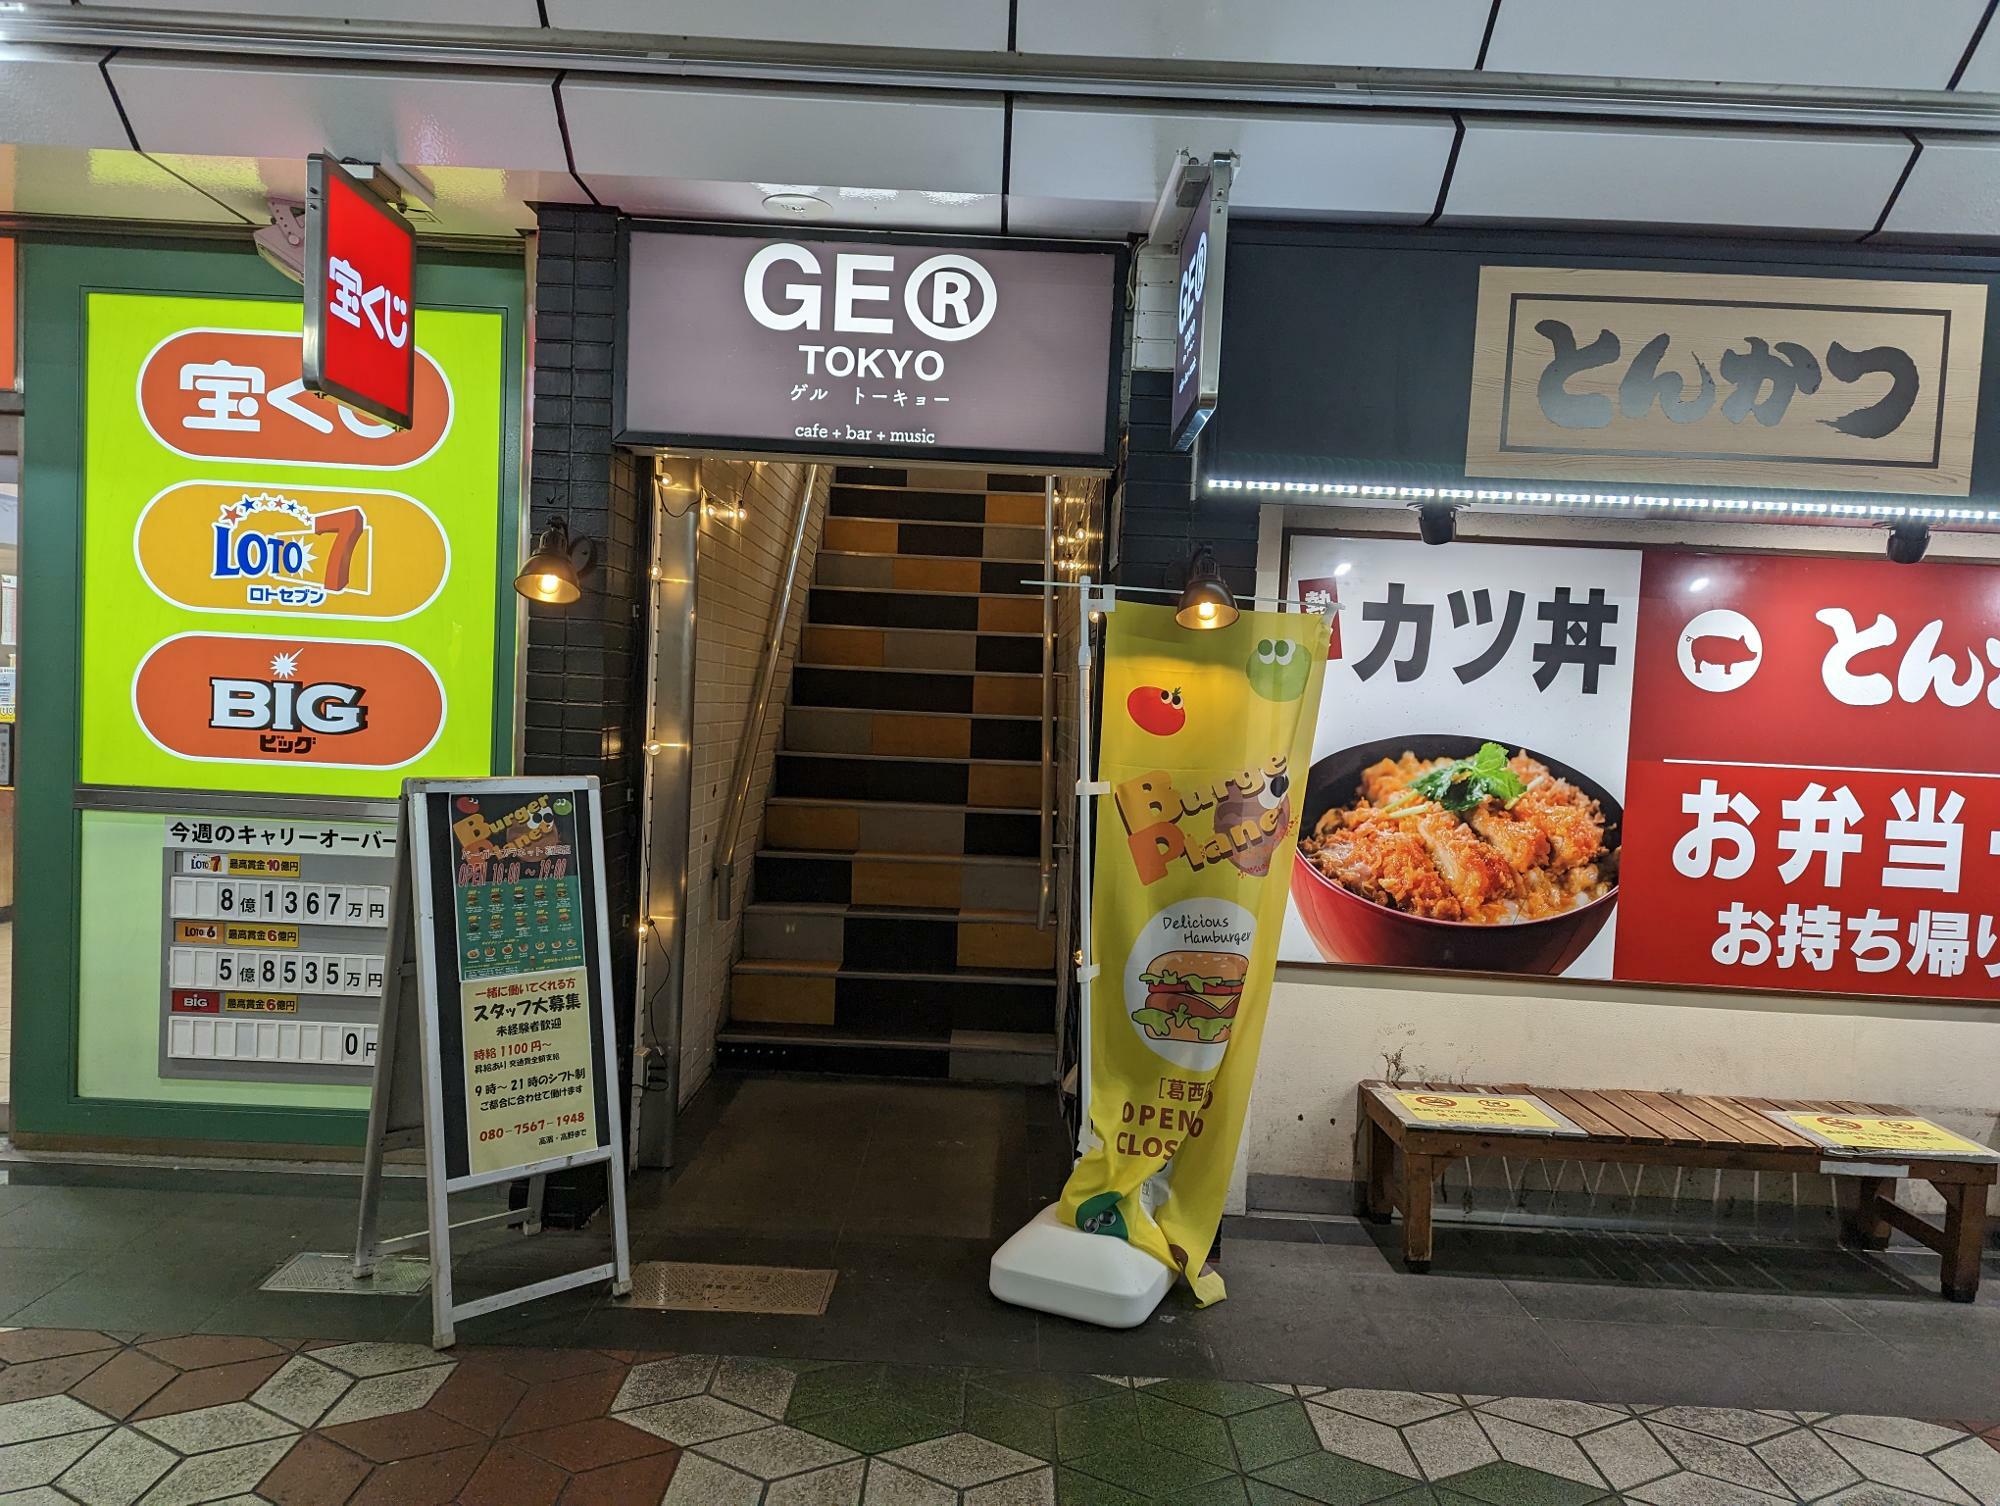 GER TOKYO with BURGER PLANET